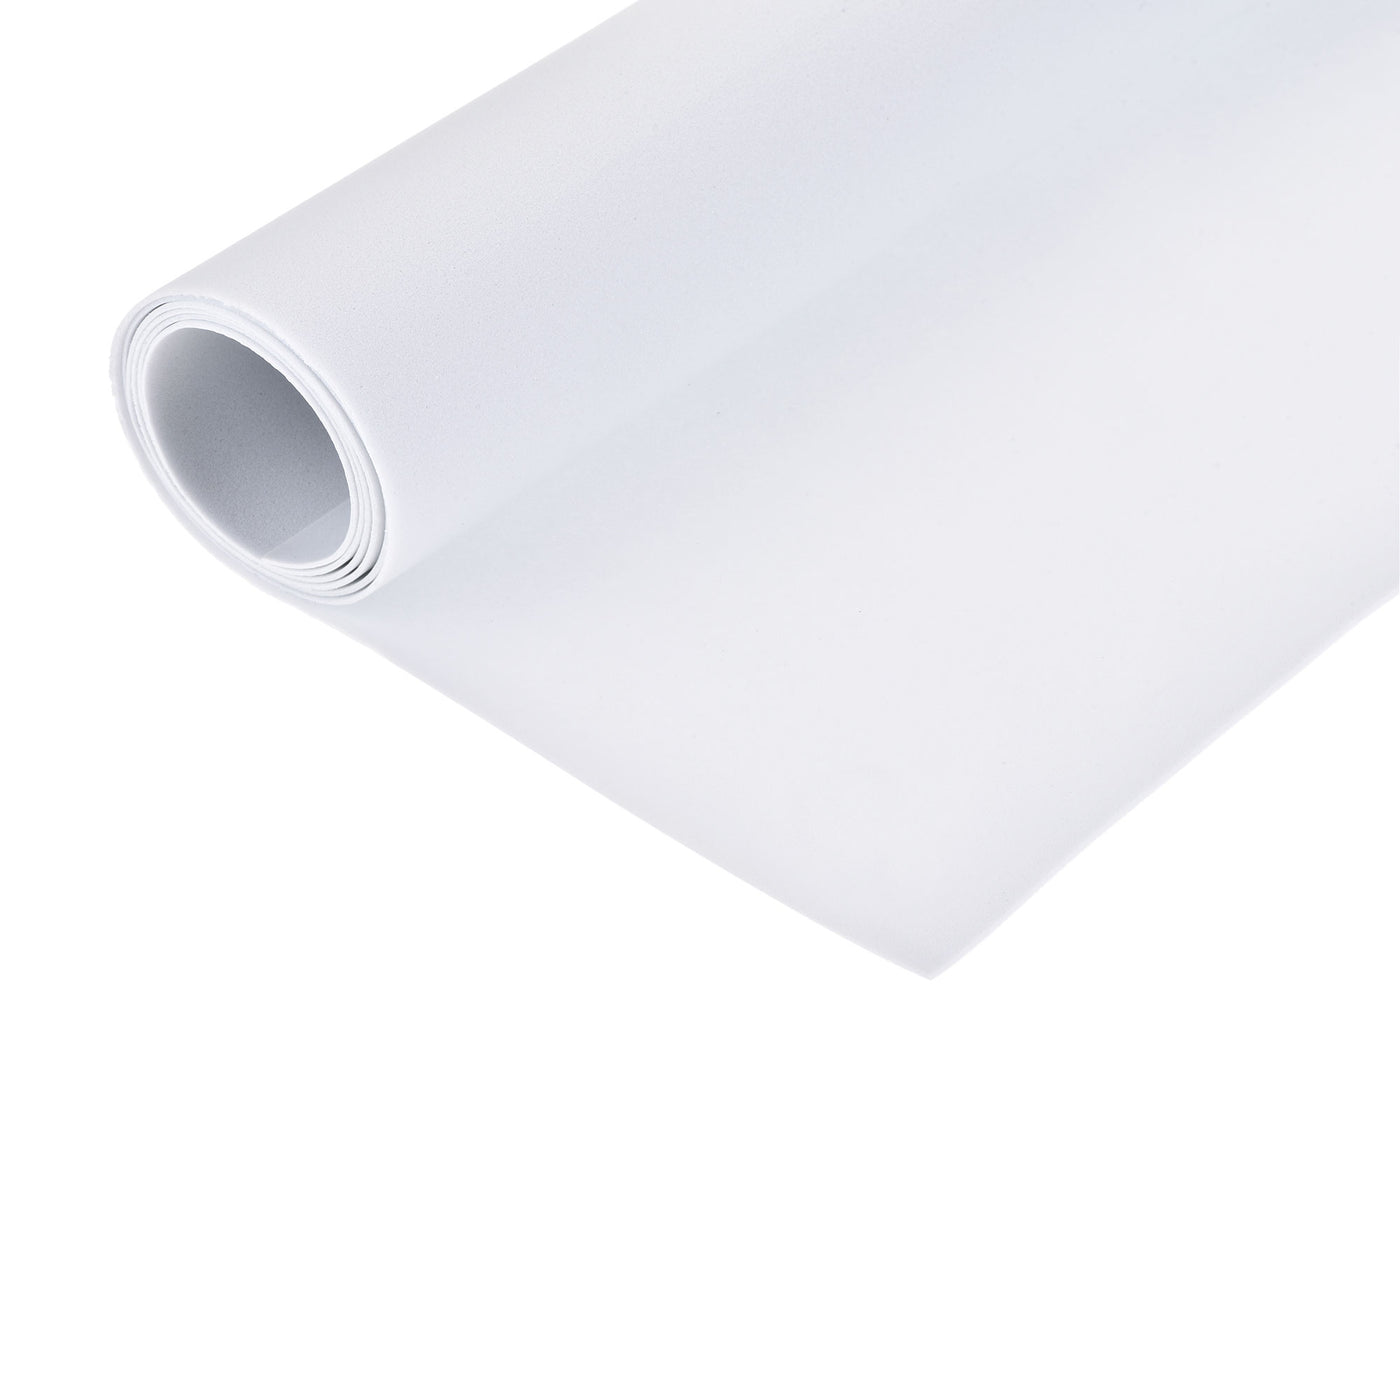 Uxcell Uxcell White EVA Foam Sheets Roll 13 x 39 Inch 10mm Thick for Crafts DIY Projects